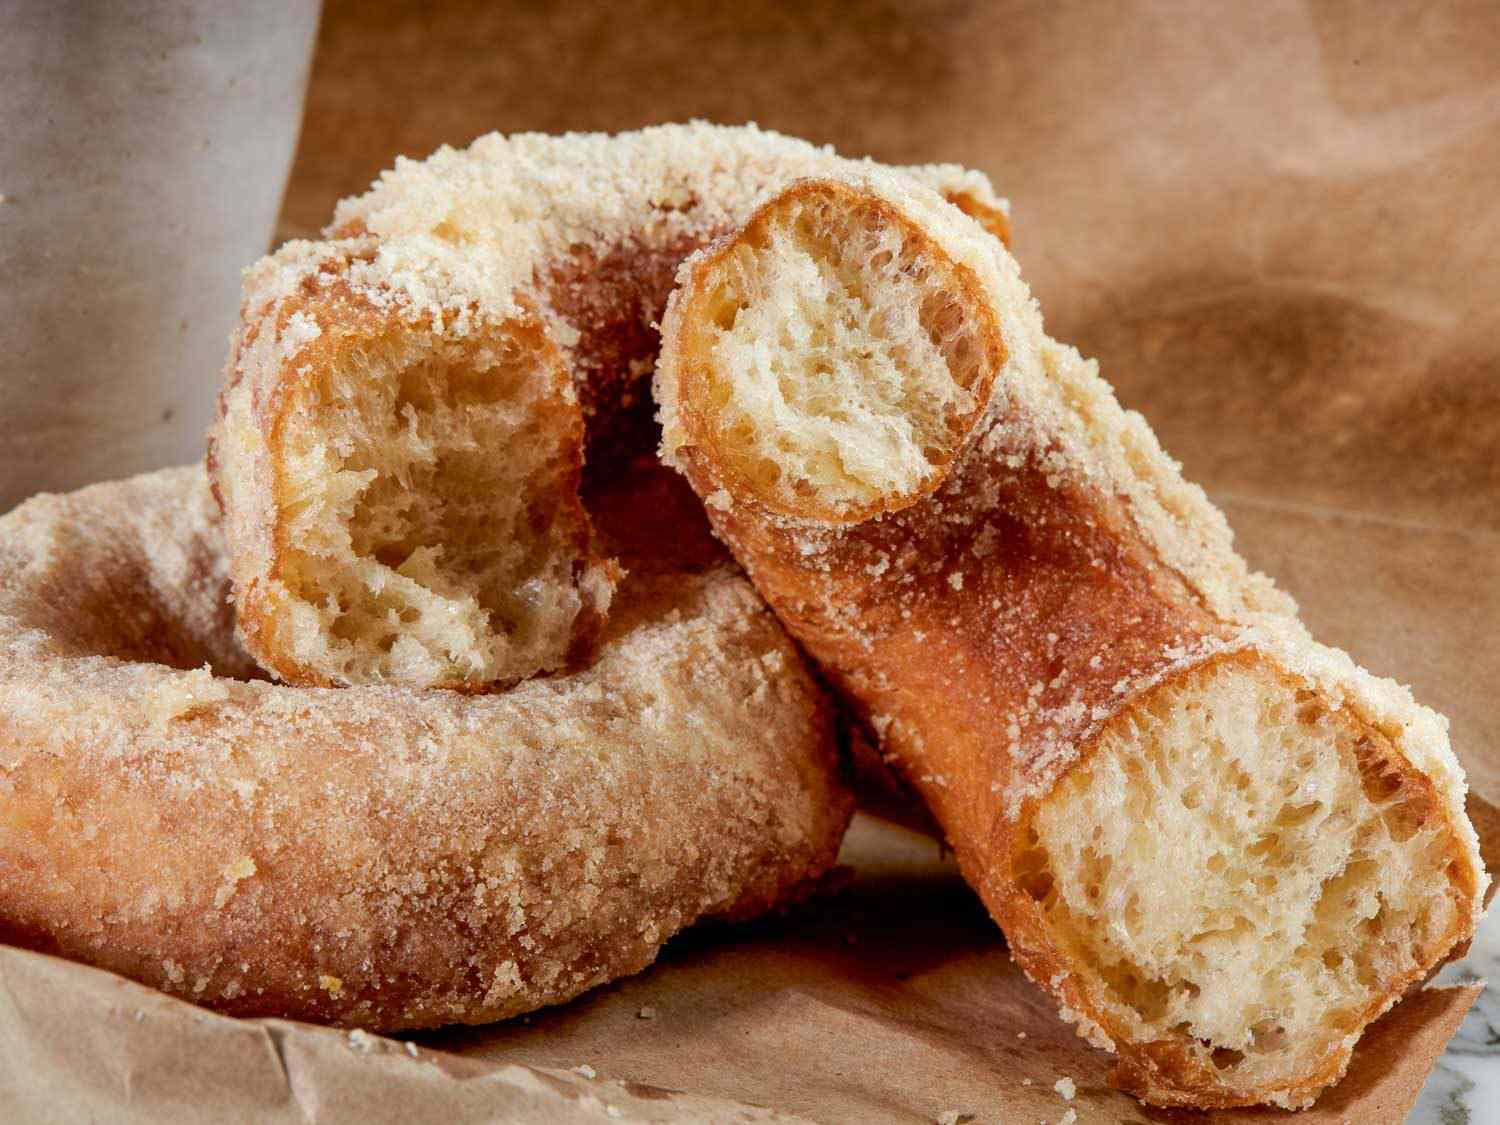 apple cider doughnut torn in half to reveal its interior crumb